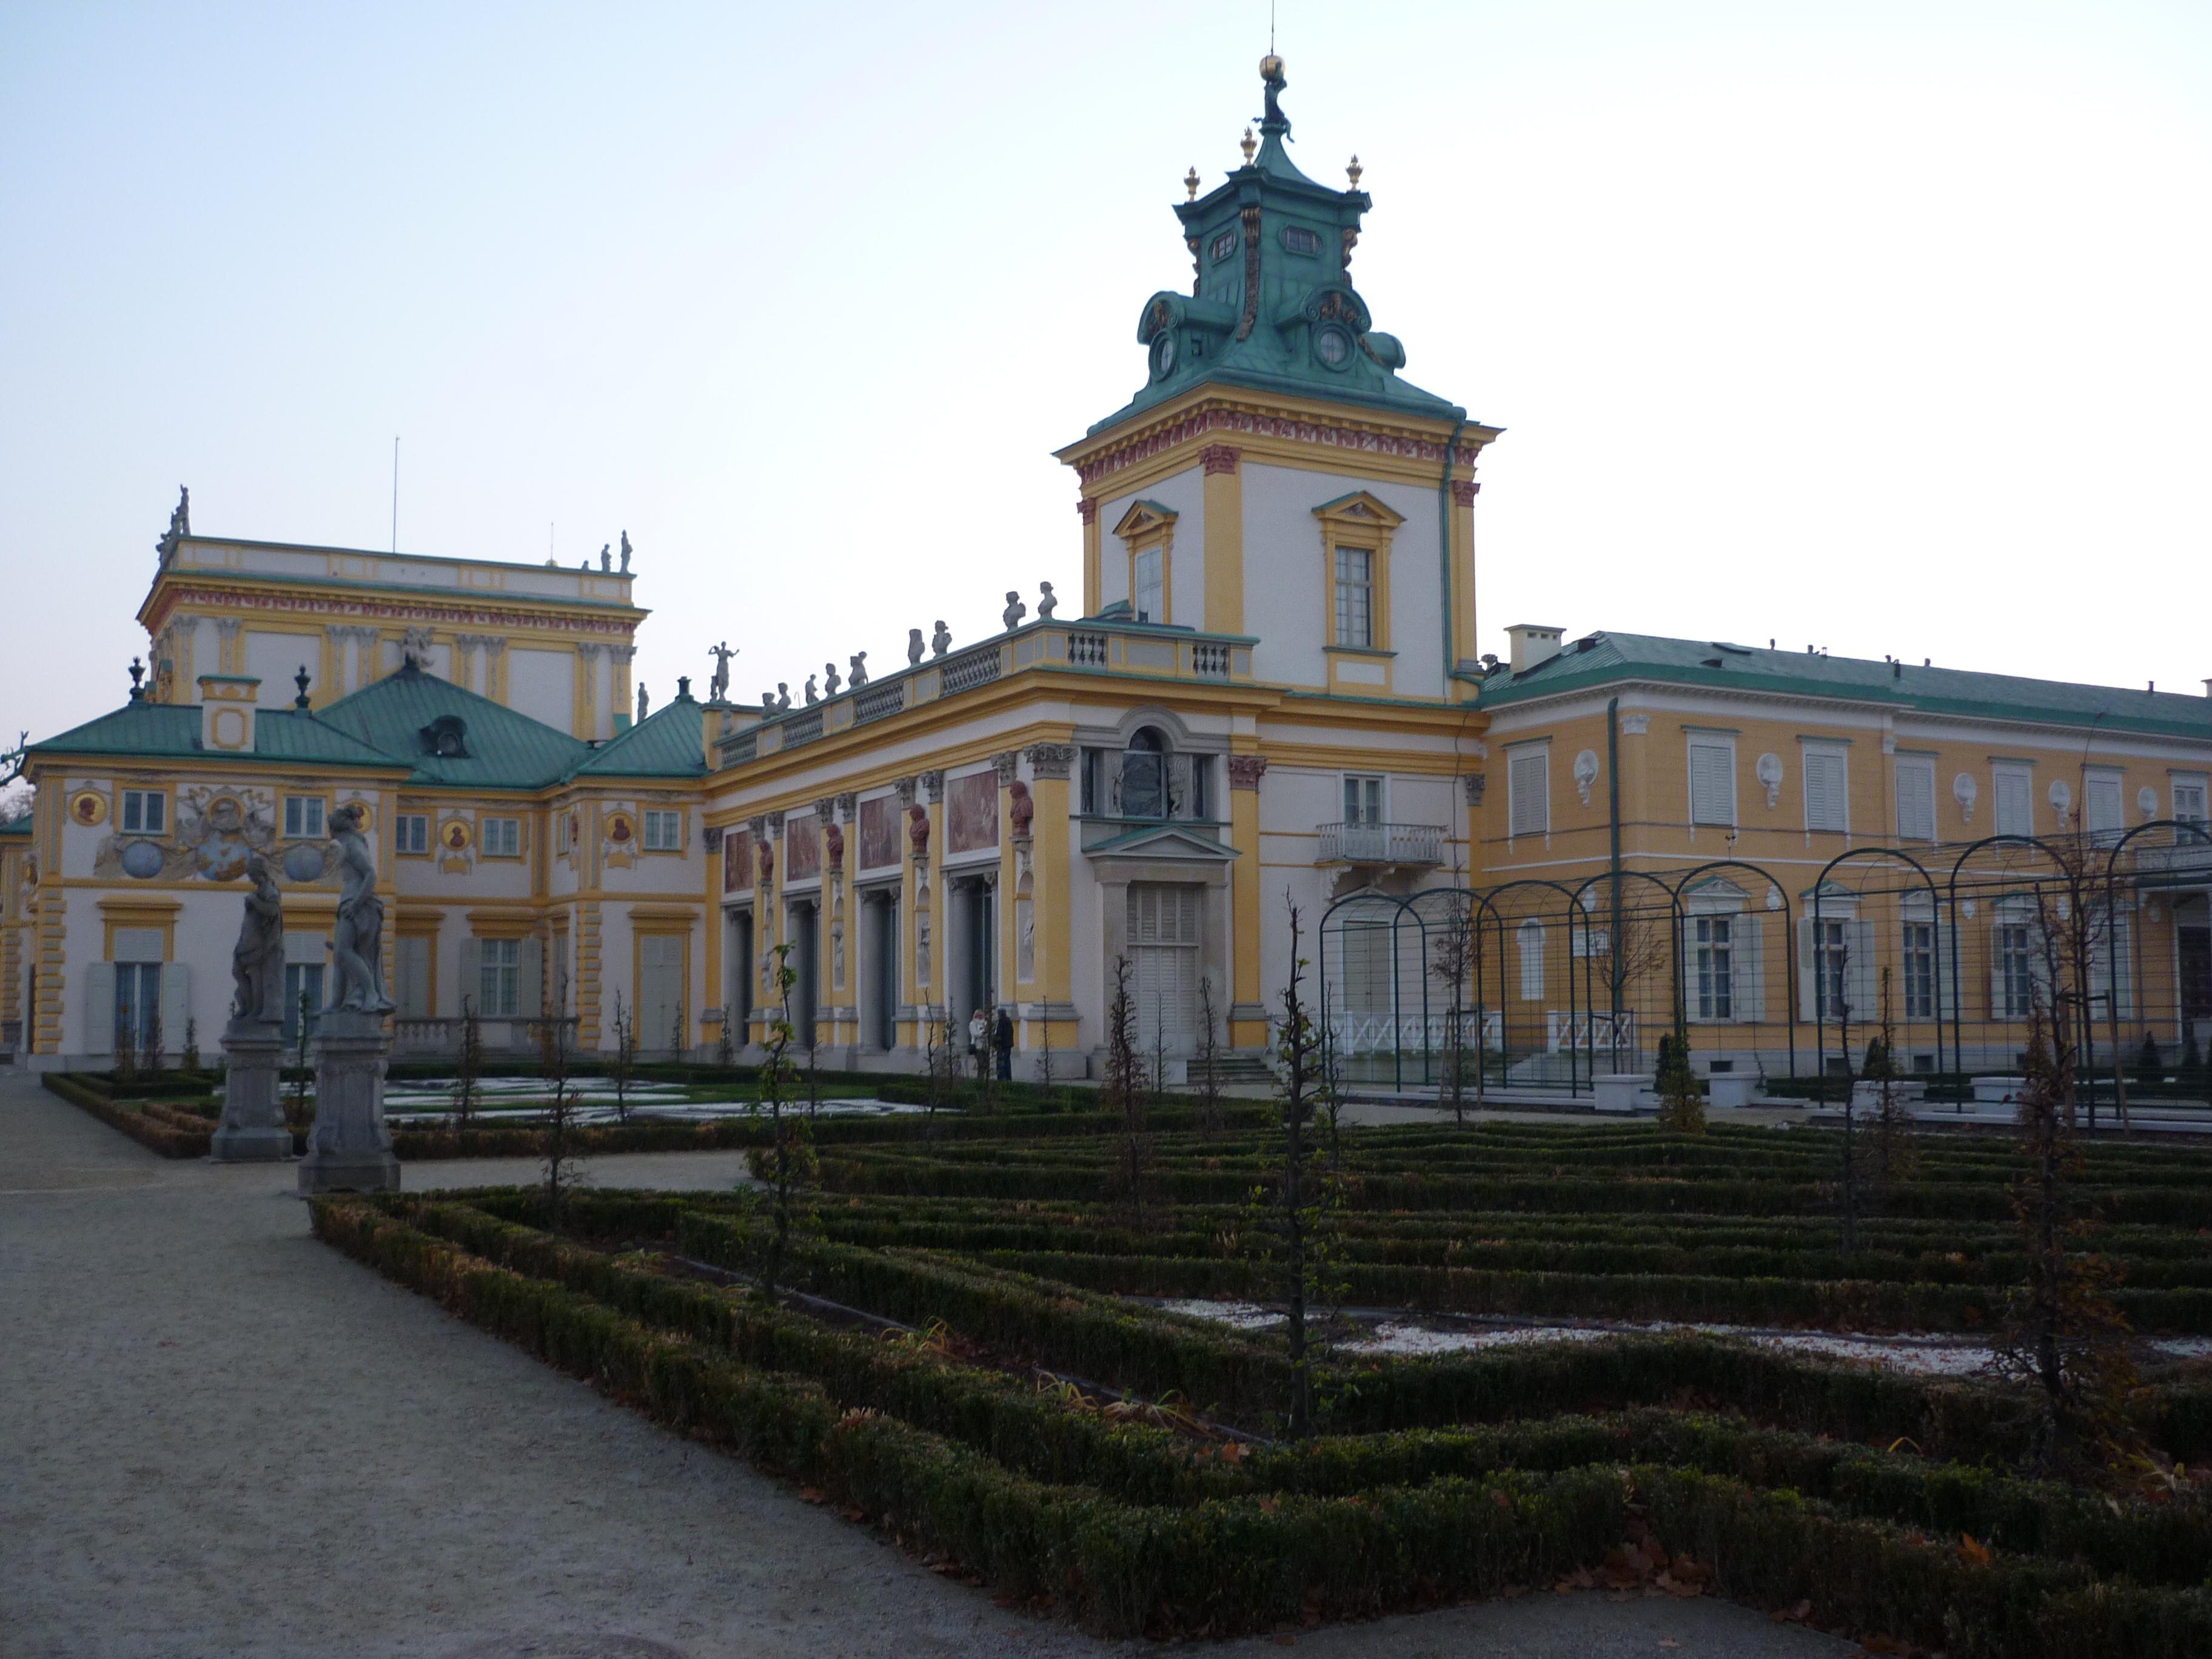 Cover image of this place Wilanów Palace